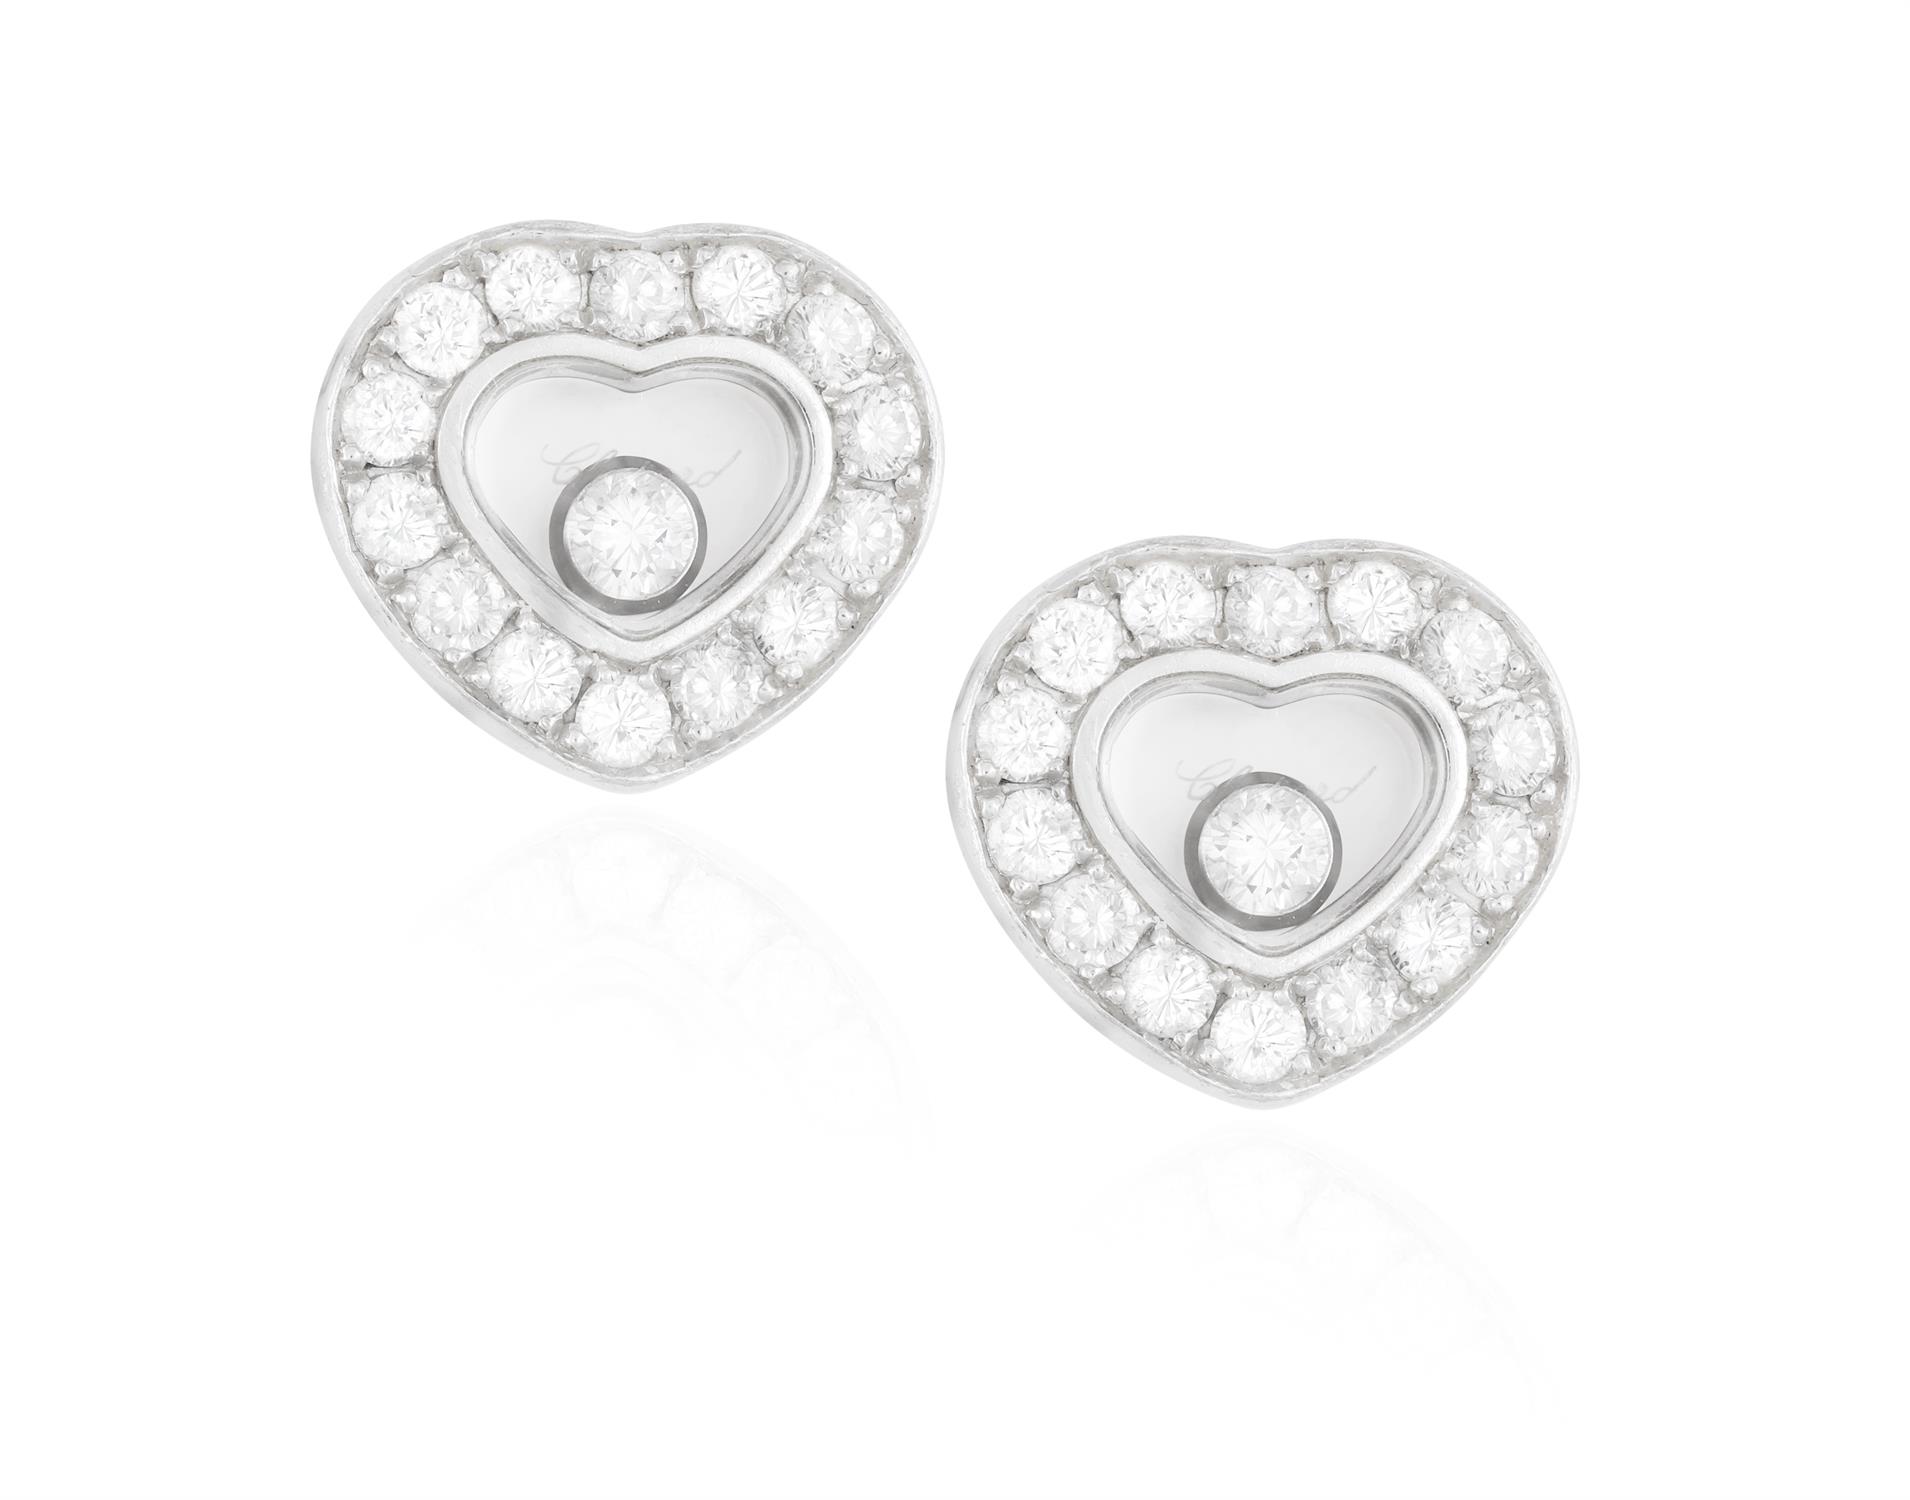 A PAIR OF 'HAPPY DIAMOND' EARRINGS, BY CHOPARD Each heart-shaped glazed compartment containing a